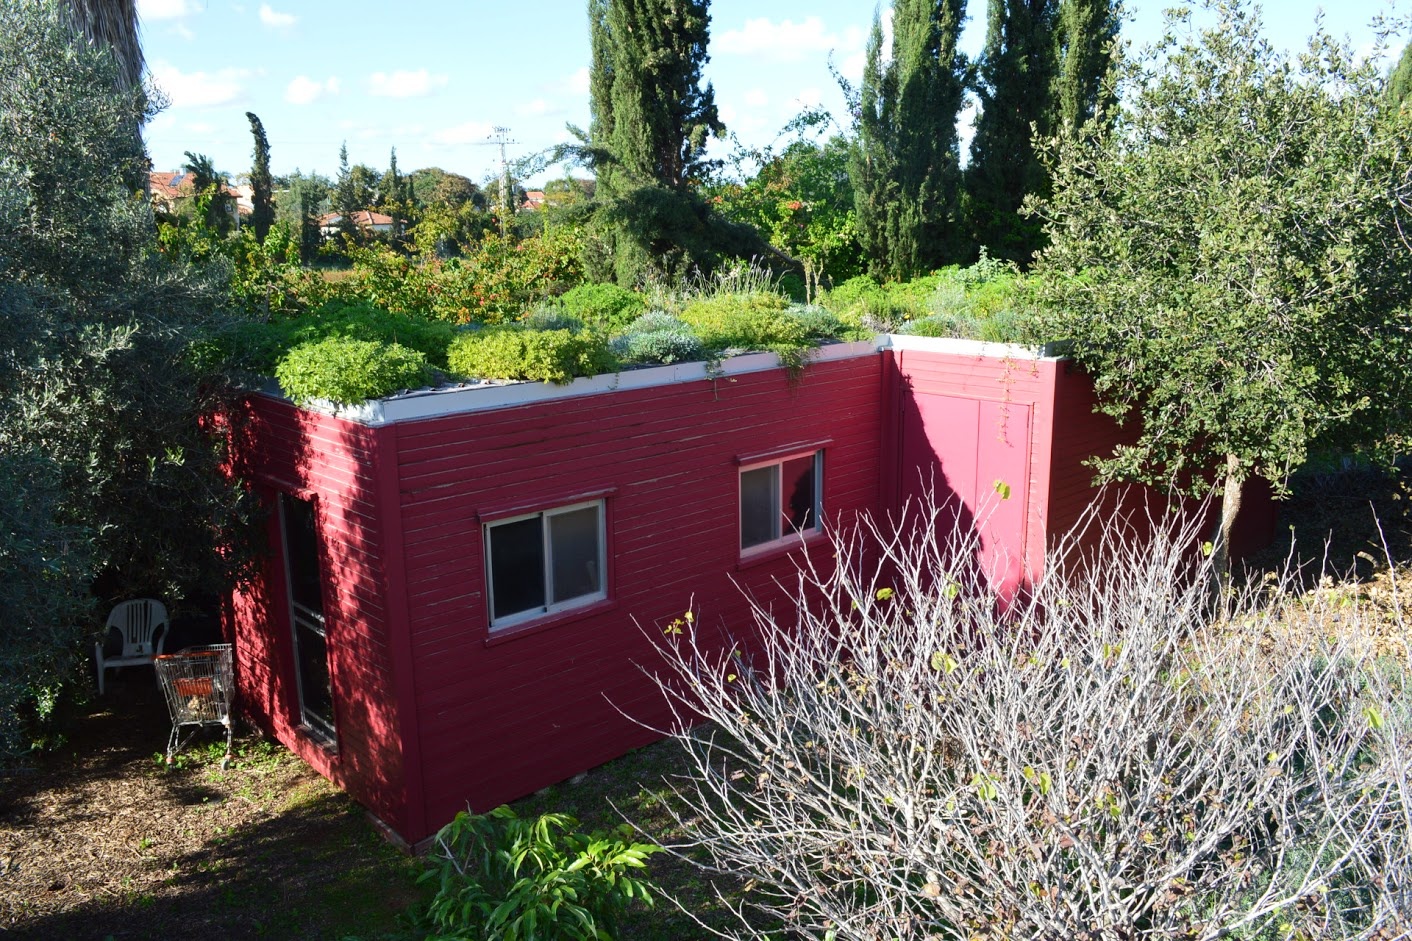 Why Do You Think #Greenroofs Are Important?